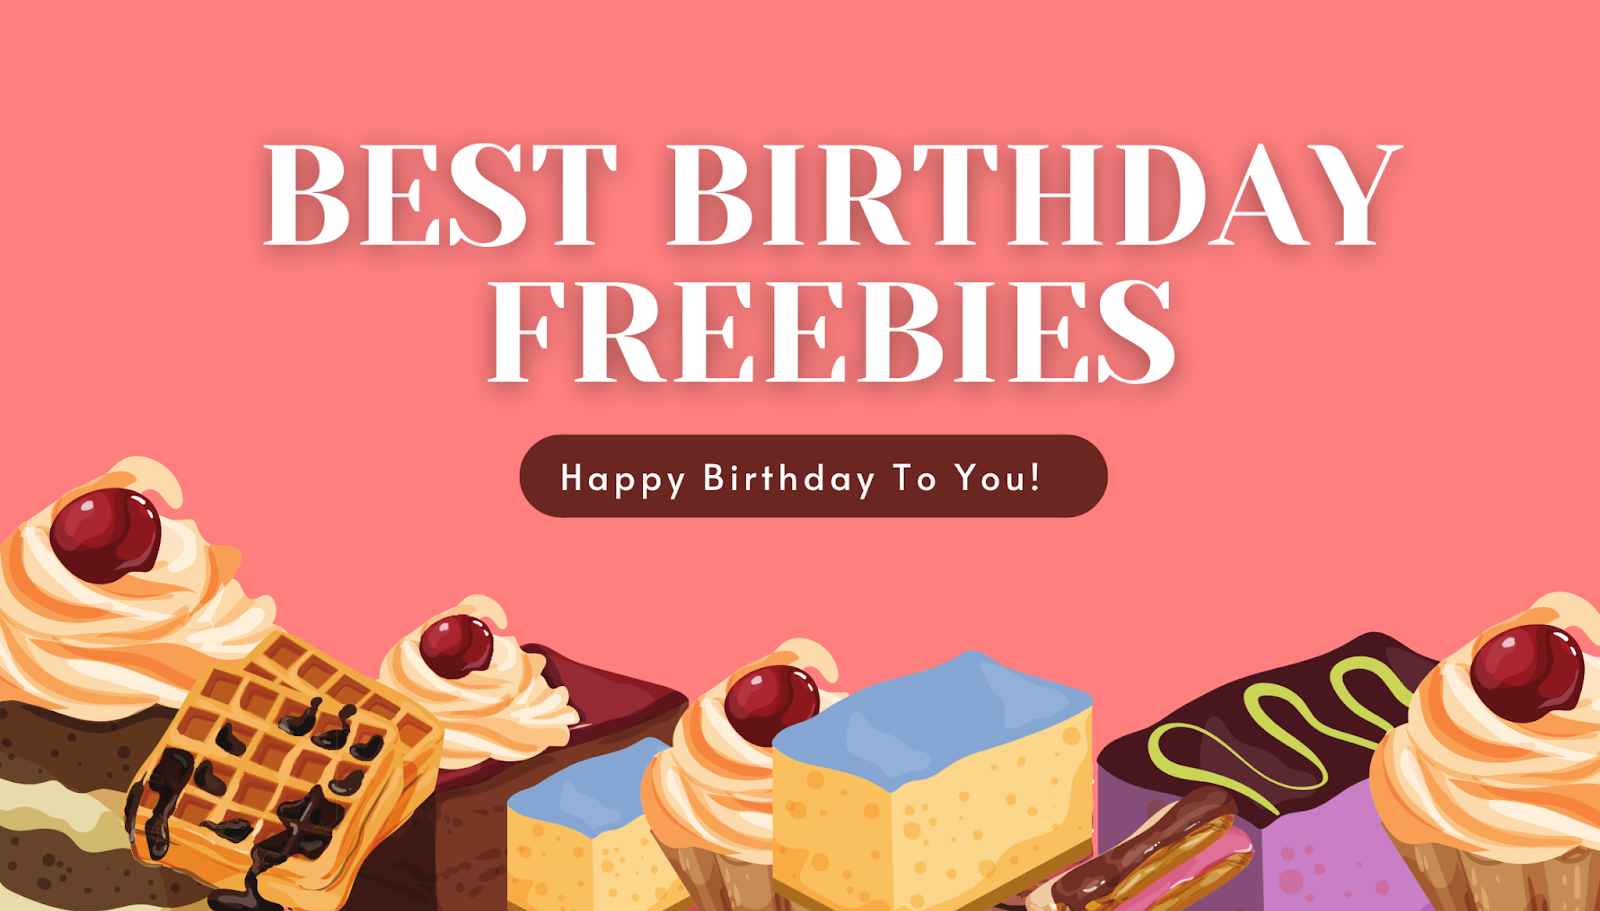 peachy pink background with cake pastries and mentioned best birthday freebies